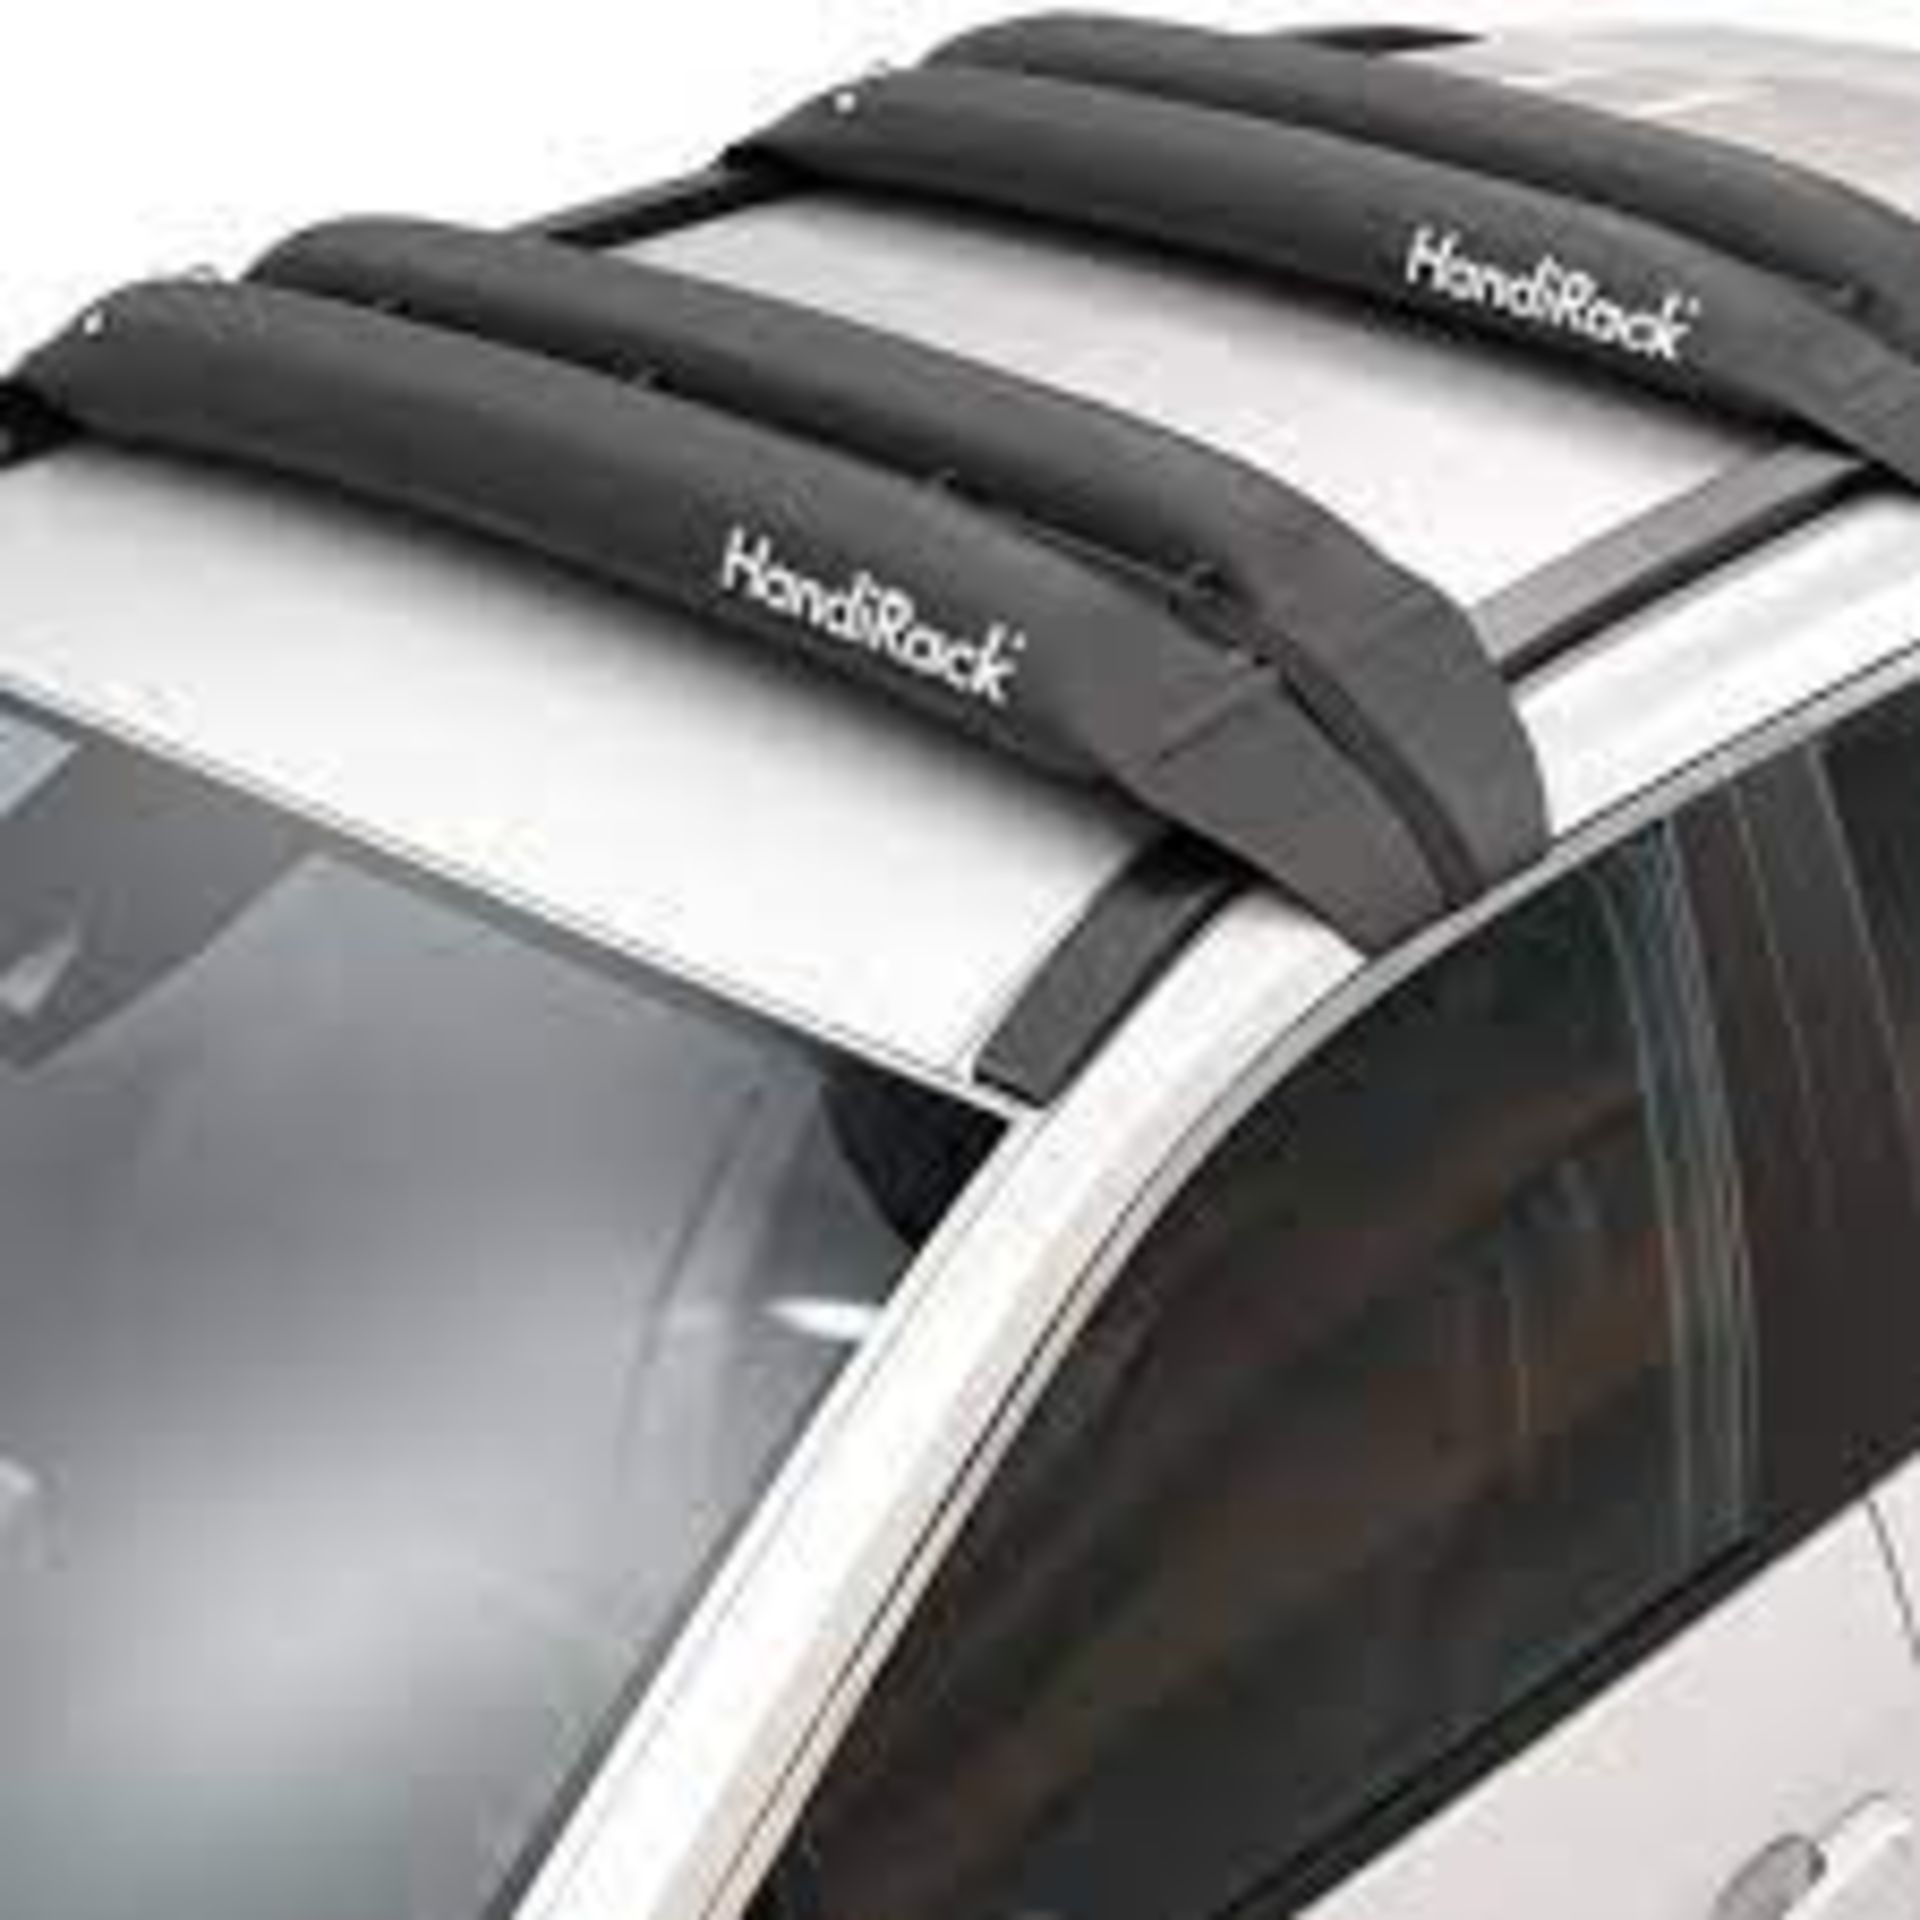 NEW BOXED HandiRack - The Ultimate in Convenience Roofracks. Multi purpose inflatable load